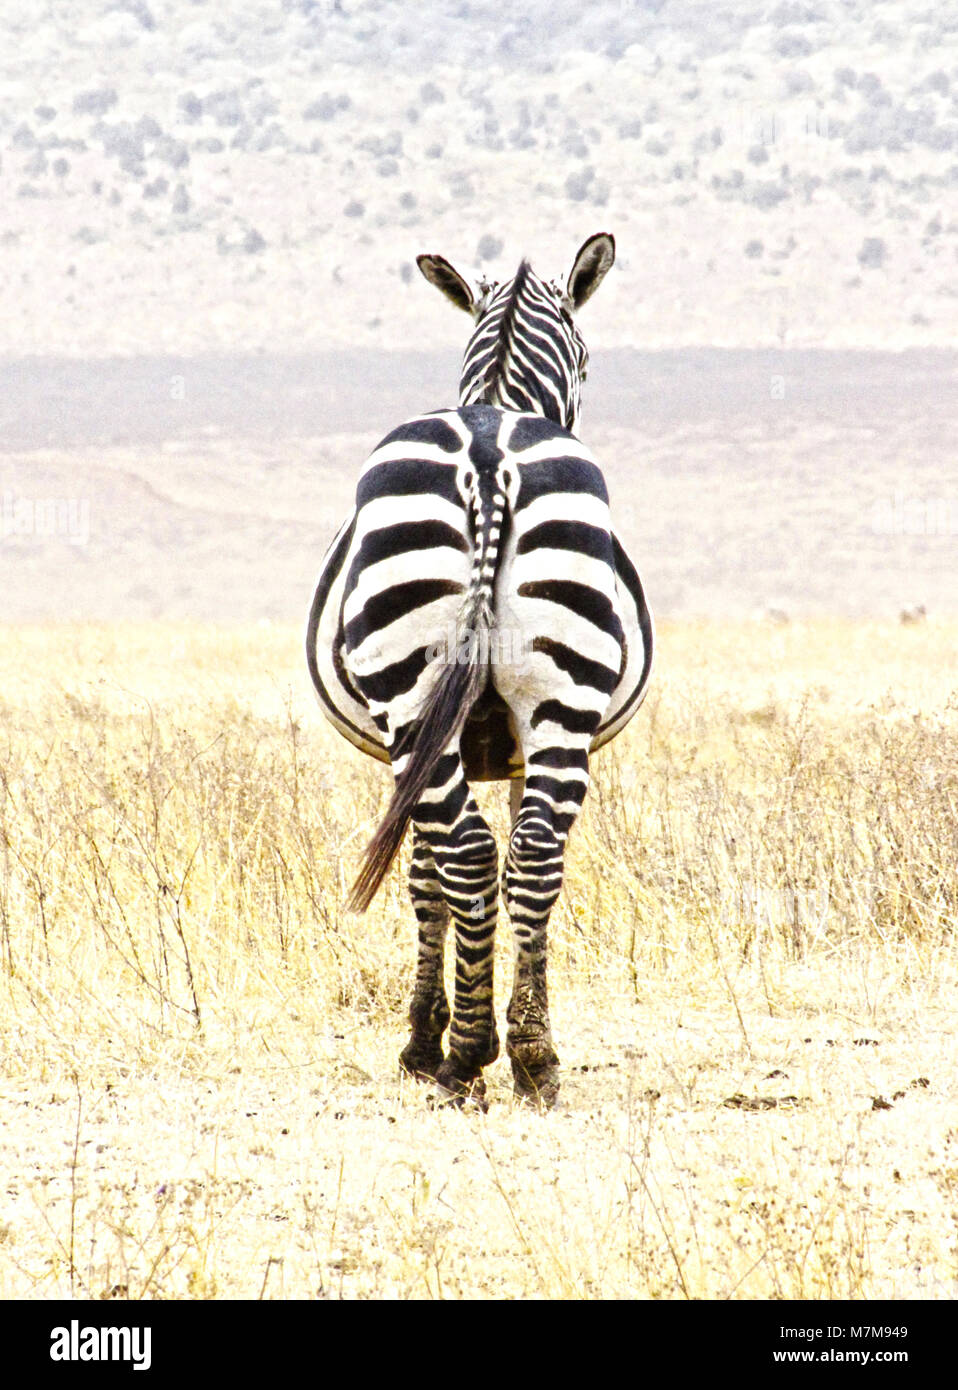 zebra from behind, wild animal in landscape, black and white stripes Stock  Photo - Alamy